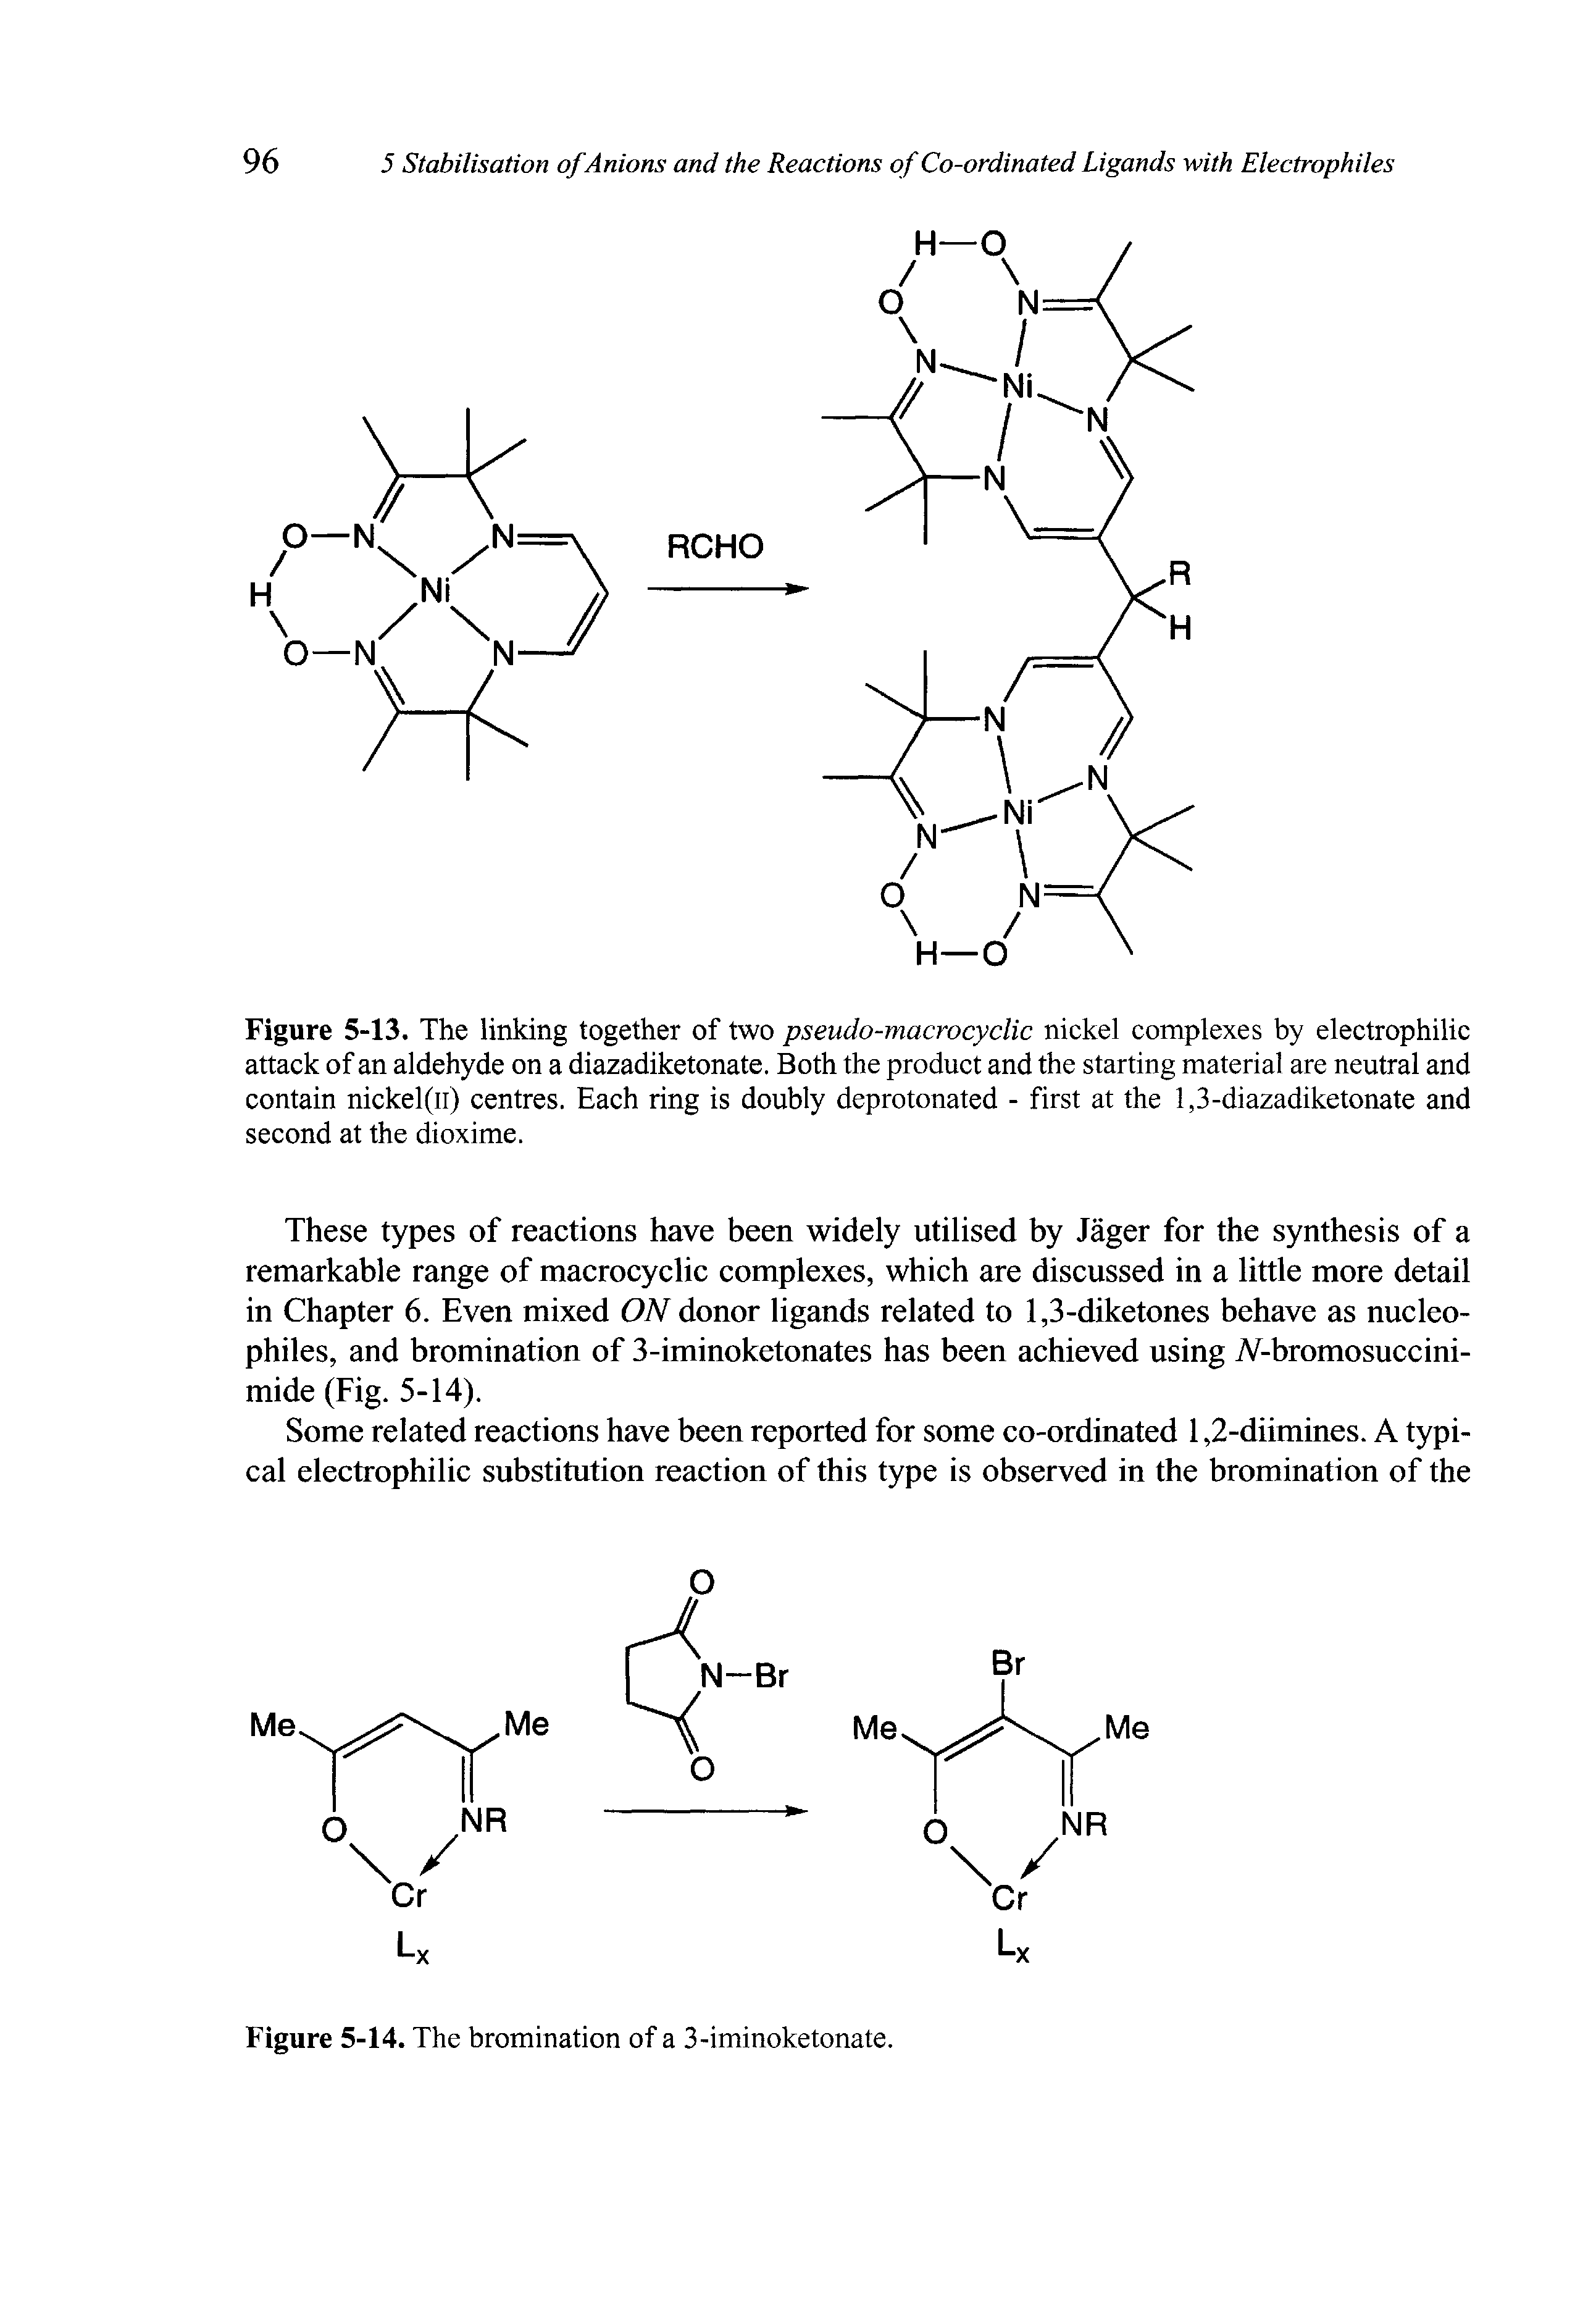 Figure 5-13. The linking together of two pseudo-macrocyclic nickel complexes by electrophilic attack of an aldehyde on a diazadiketonate. Both the product and the starting material are neutral and contain nickel(n) centres. Each ring is doubly deprotonated - first at the 1,3-diazadiketonate and second at the dioxime.